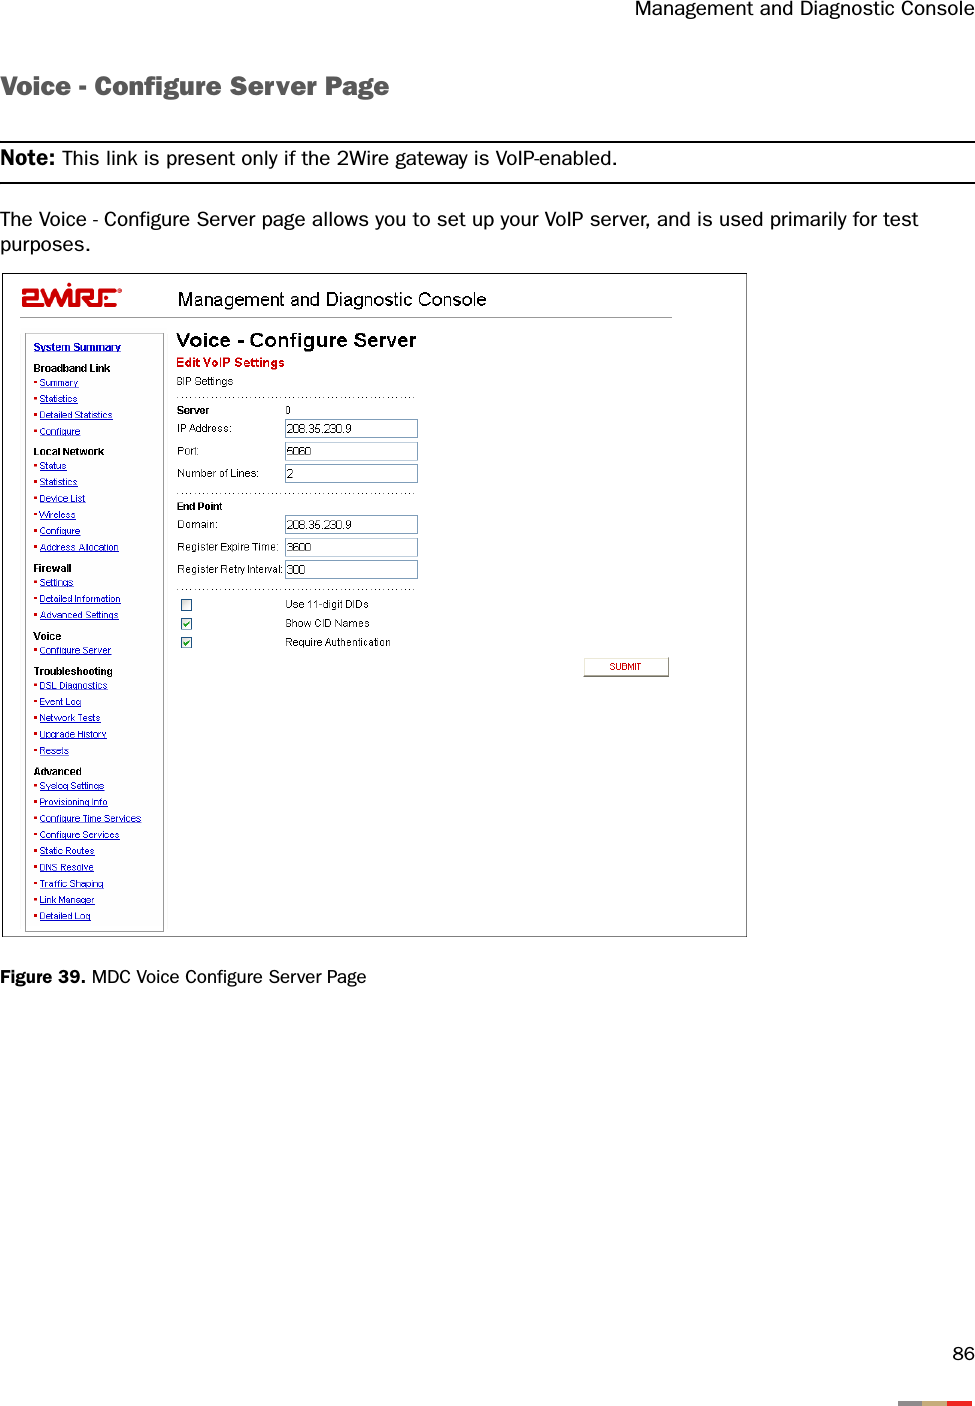 Management and Diagnostic Console86Voice - Configure Server PageNote: This link is present only if the 2Wire gateway is VoIP-enabled.The Voice - Configure Server page allows you to set up your VoIP server, and is used primarily for test purposes. Figure 39. MDC Voice Configure Server Page